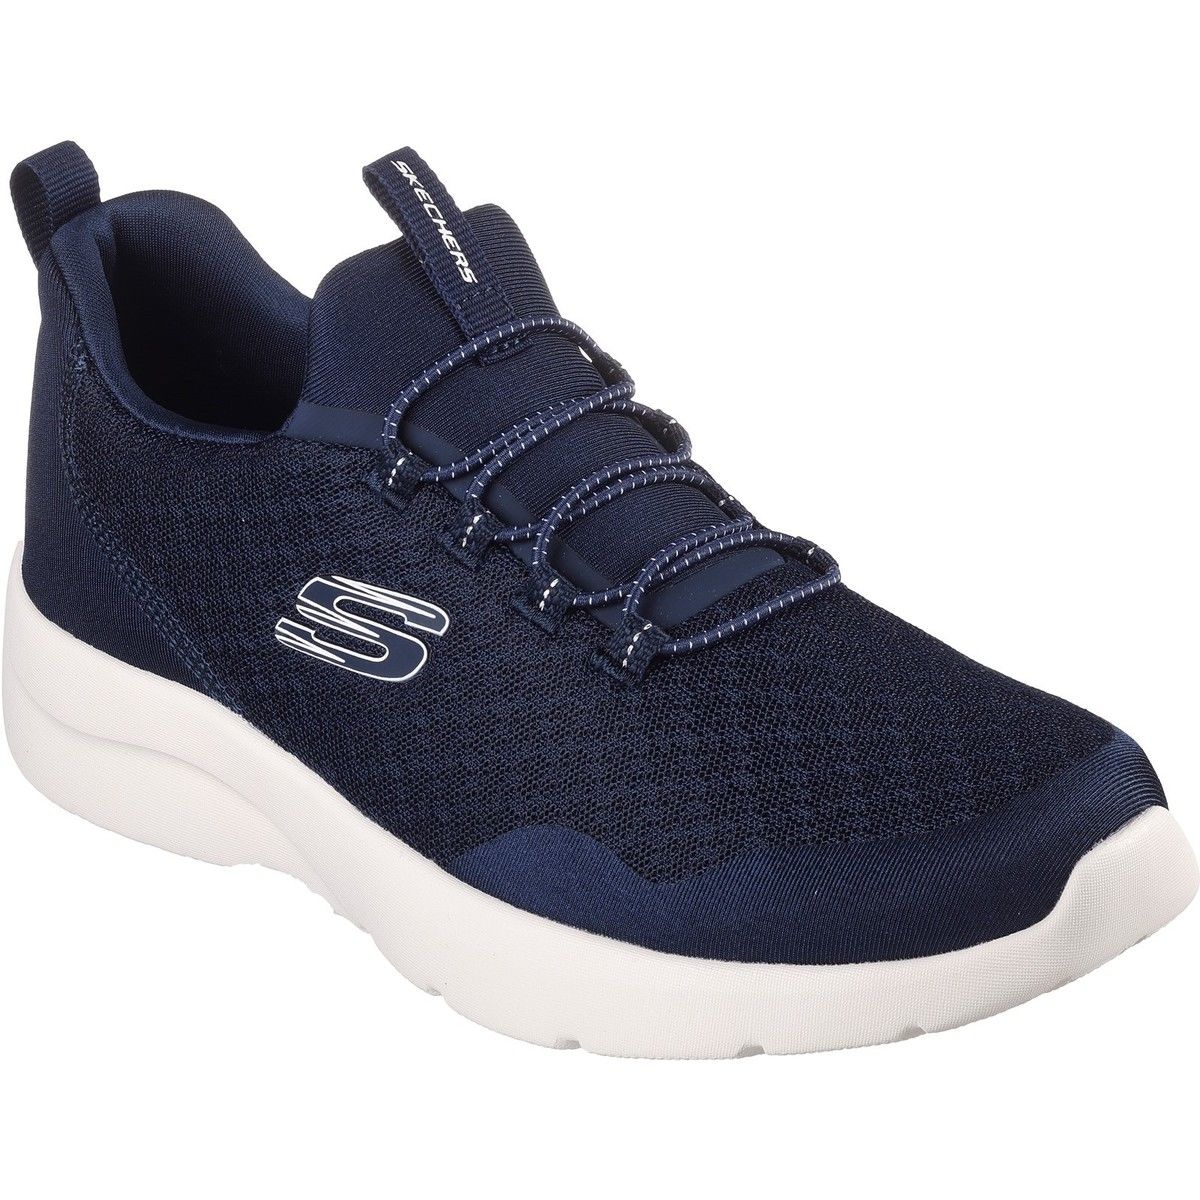 Skechers Dynamight 2.0 - Real Smooth NVY Navy Womens trainers in a Plain Textile in Size 6